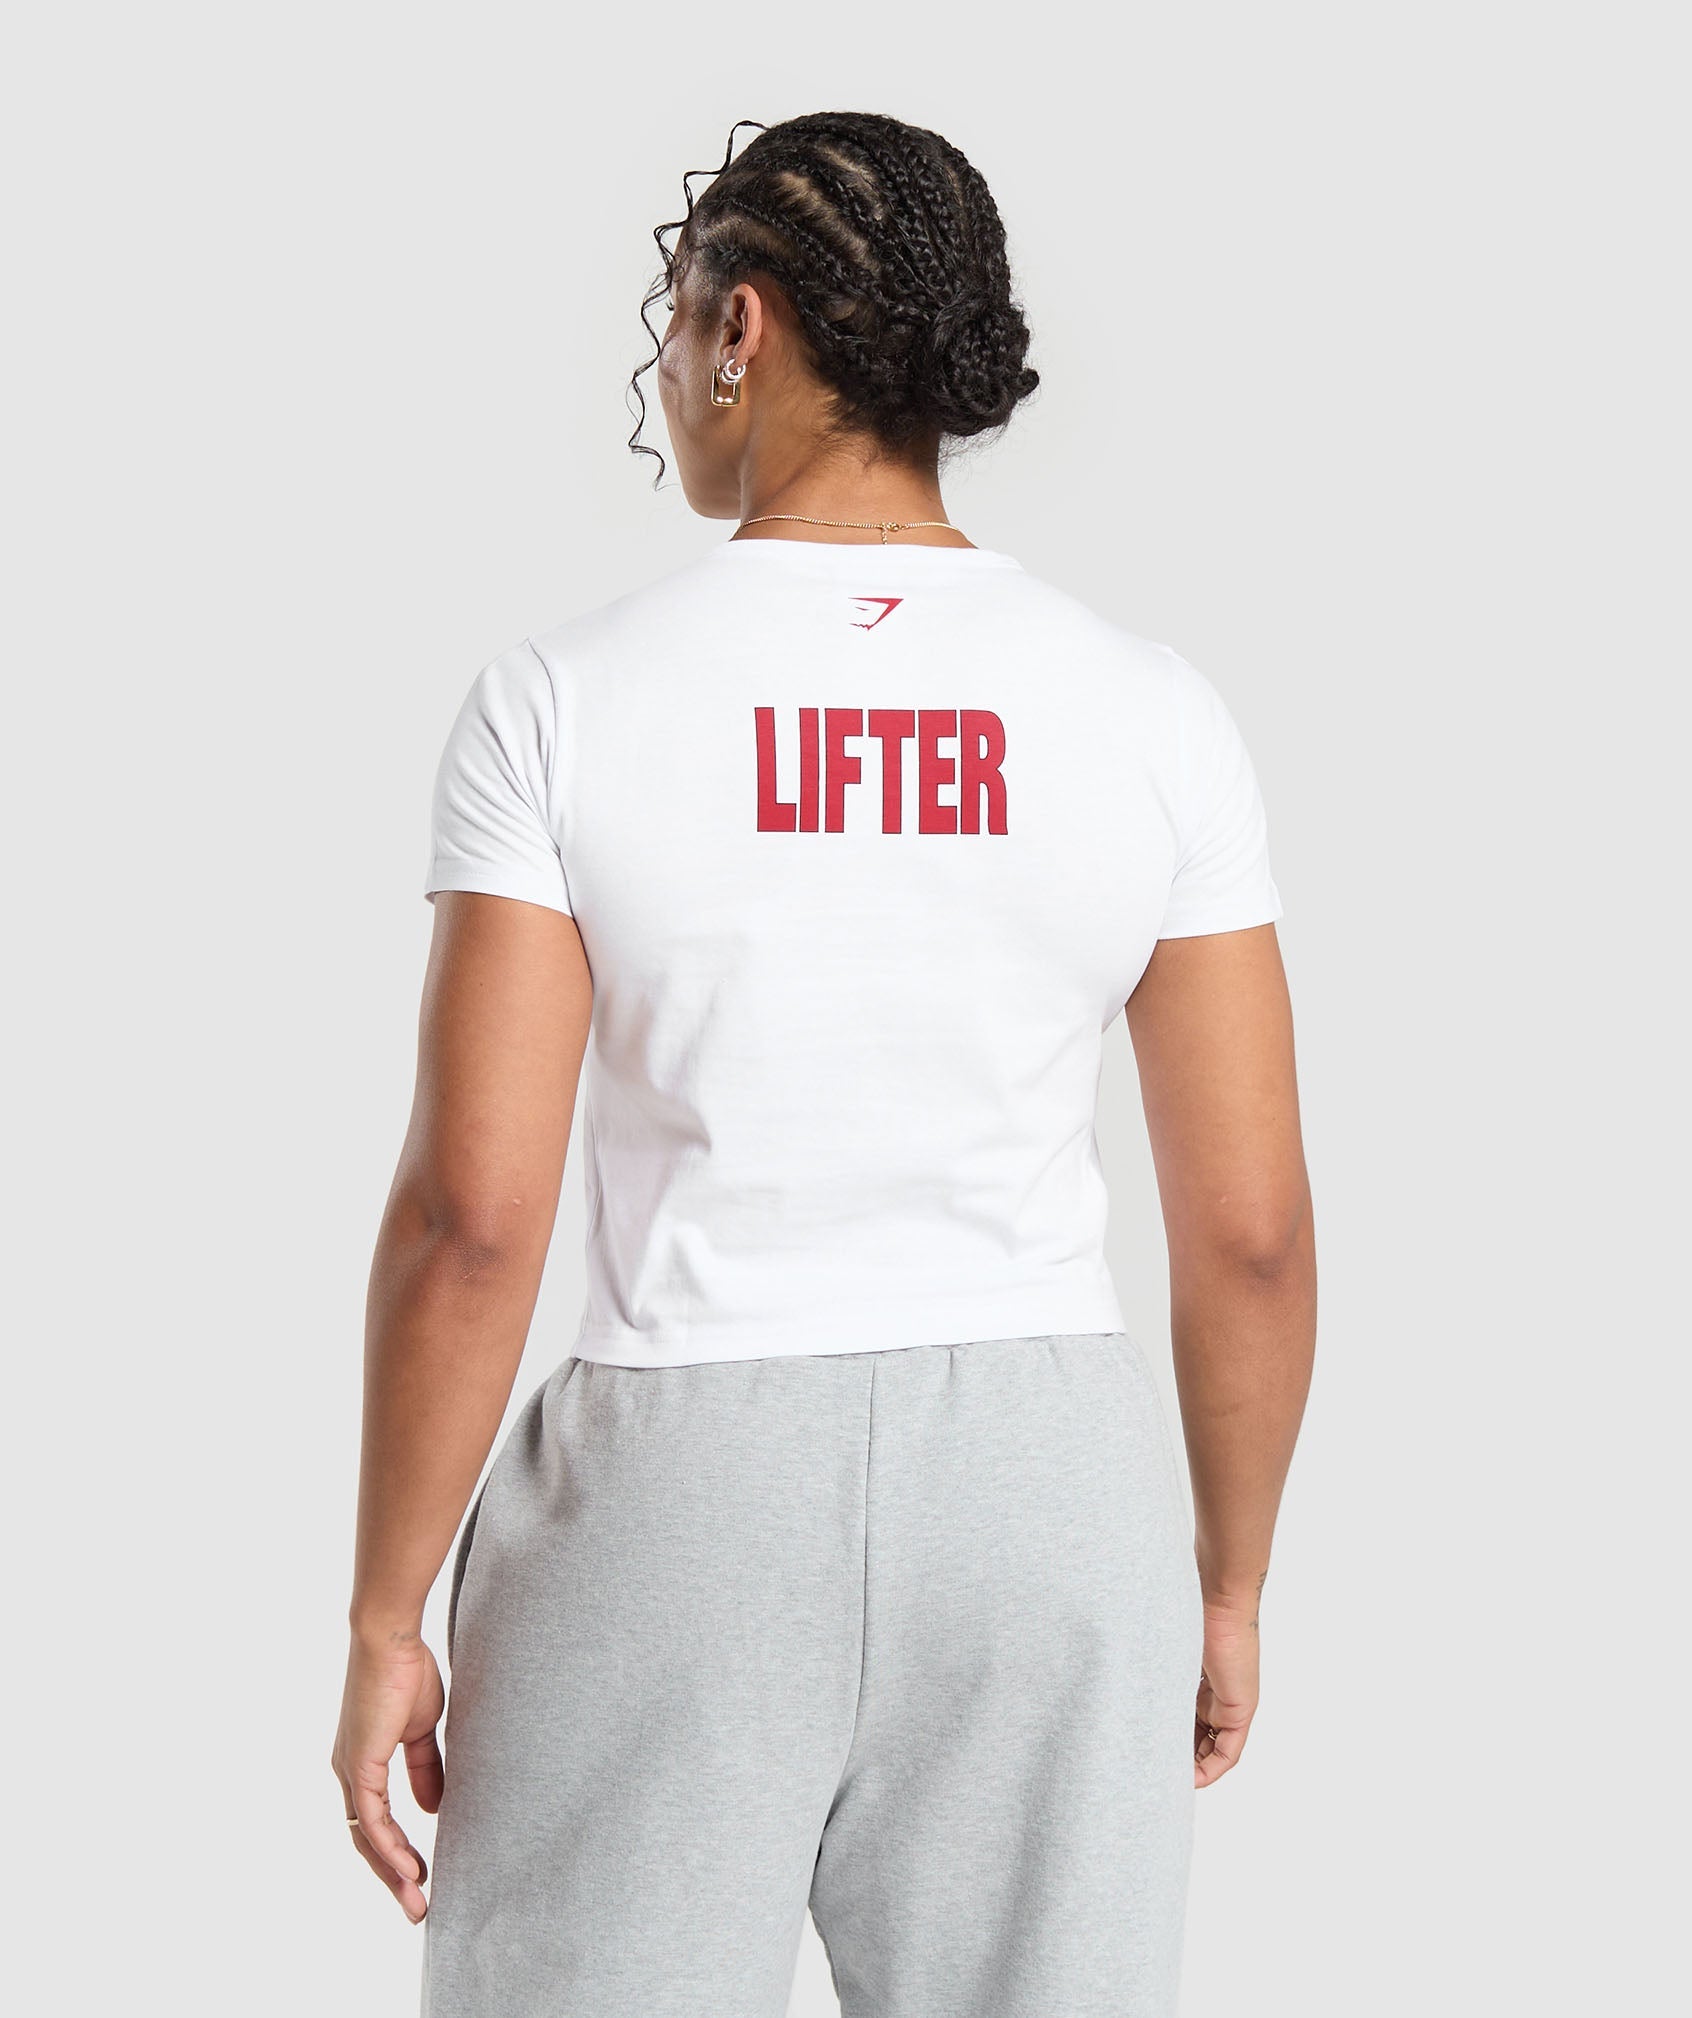 Strong Lifter Baby Tee in White - view 2